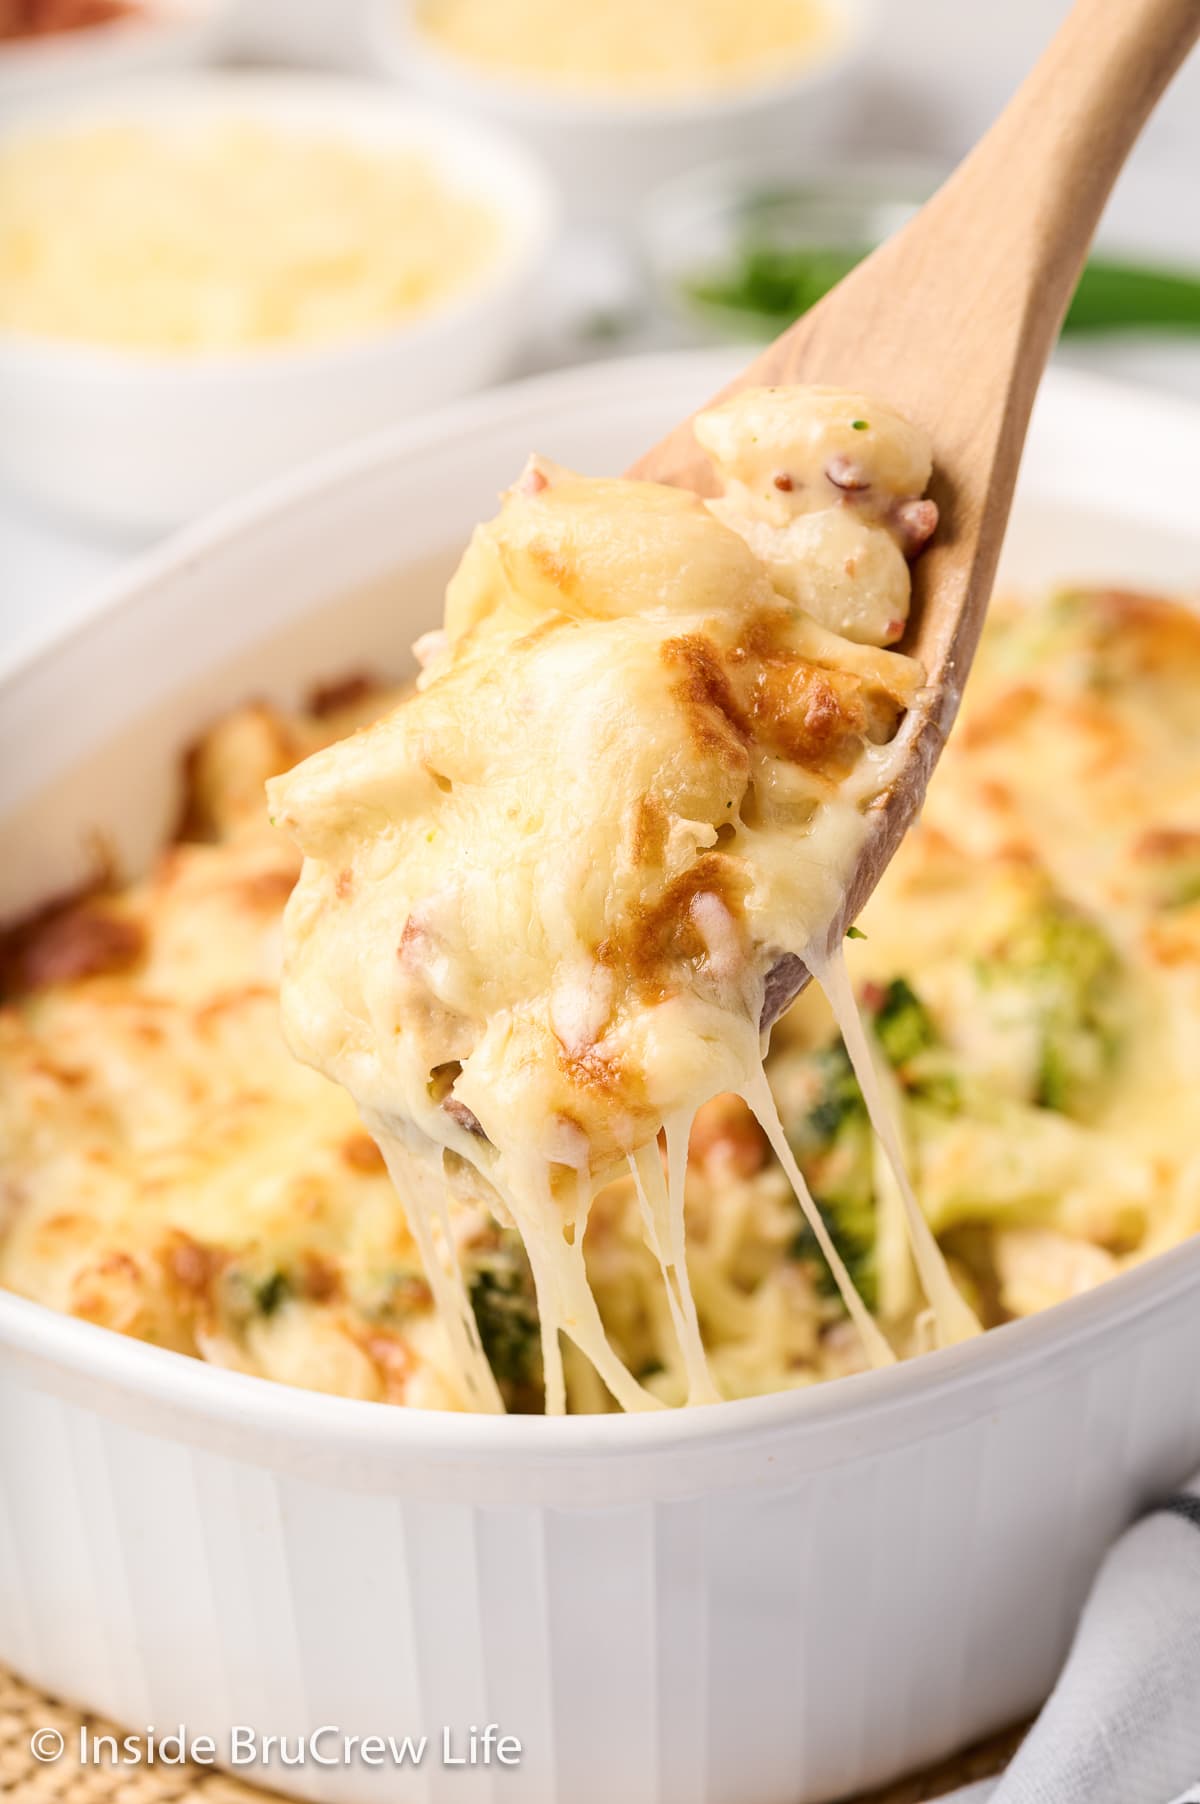 A spoon lifting a cheesy scoop of gnocchi bake out of a dish.